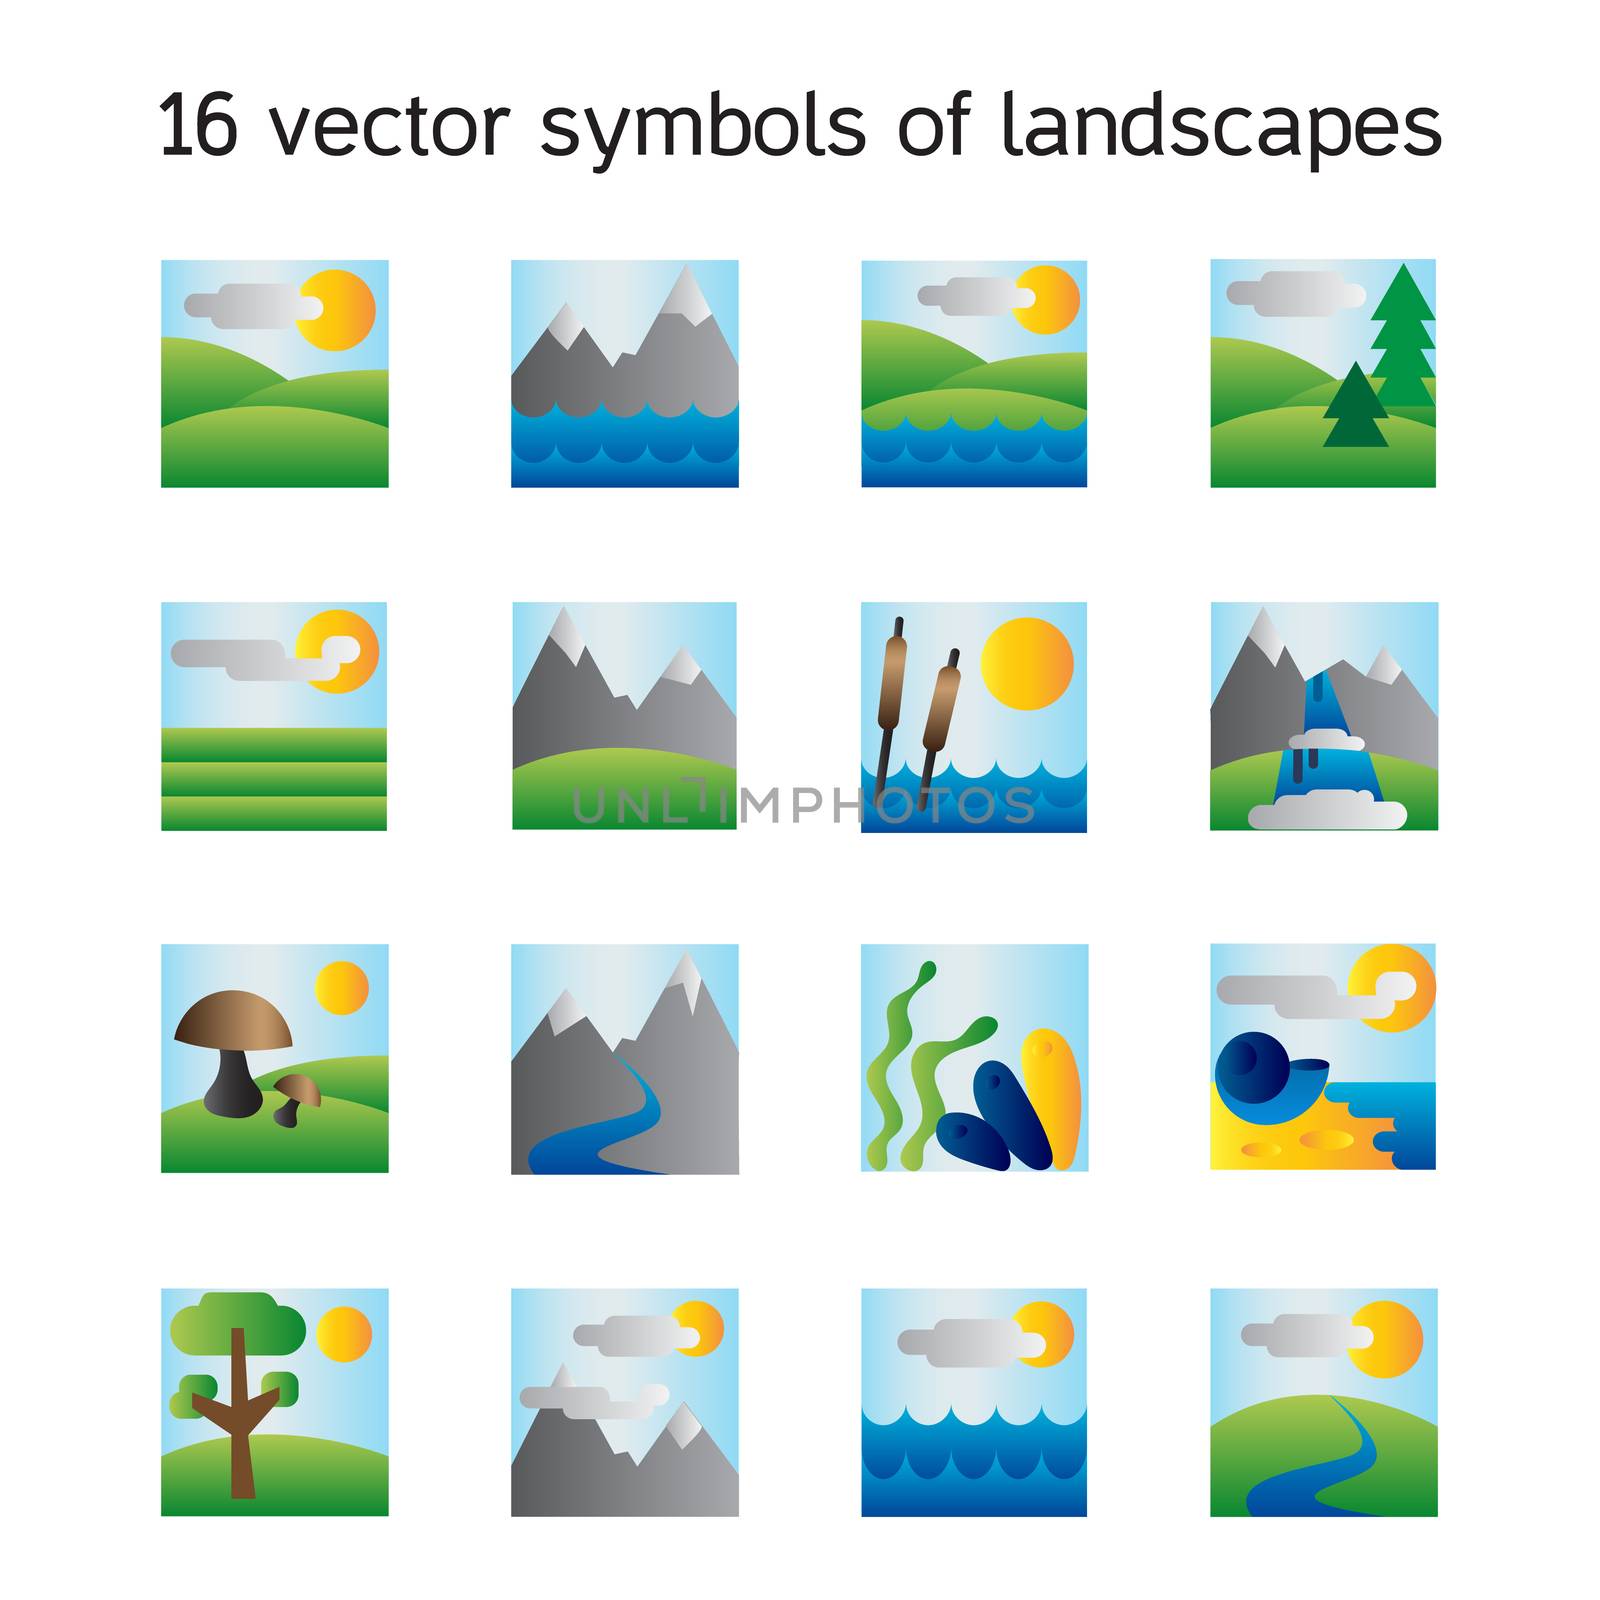 Landscape icons collection. Nature symbols and paysages in rectangle form. Vector